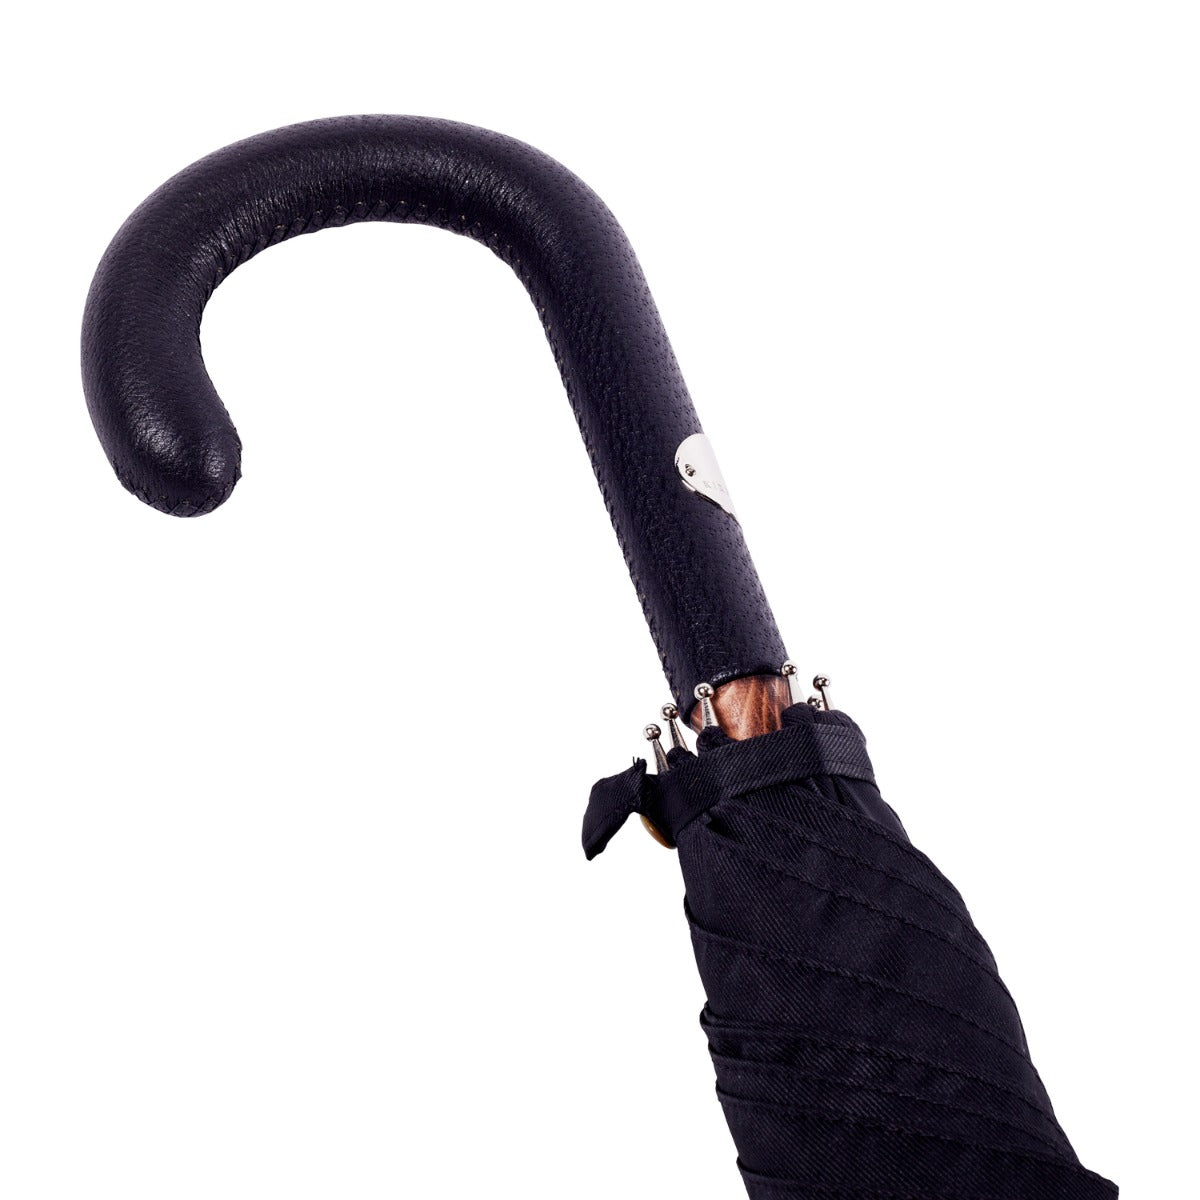 A handcrafted Black Pigskin Solid Stick Umbrella with Black Canopy from Milan, Italy by KirbyAllison.com.